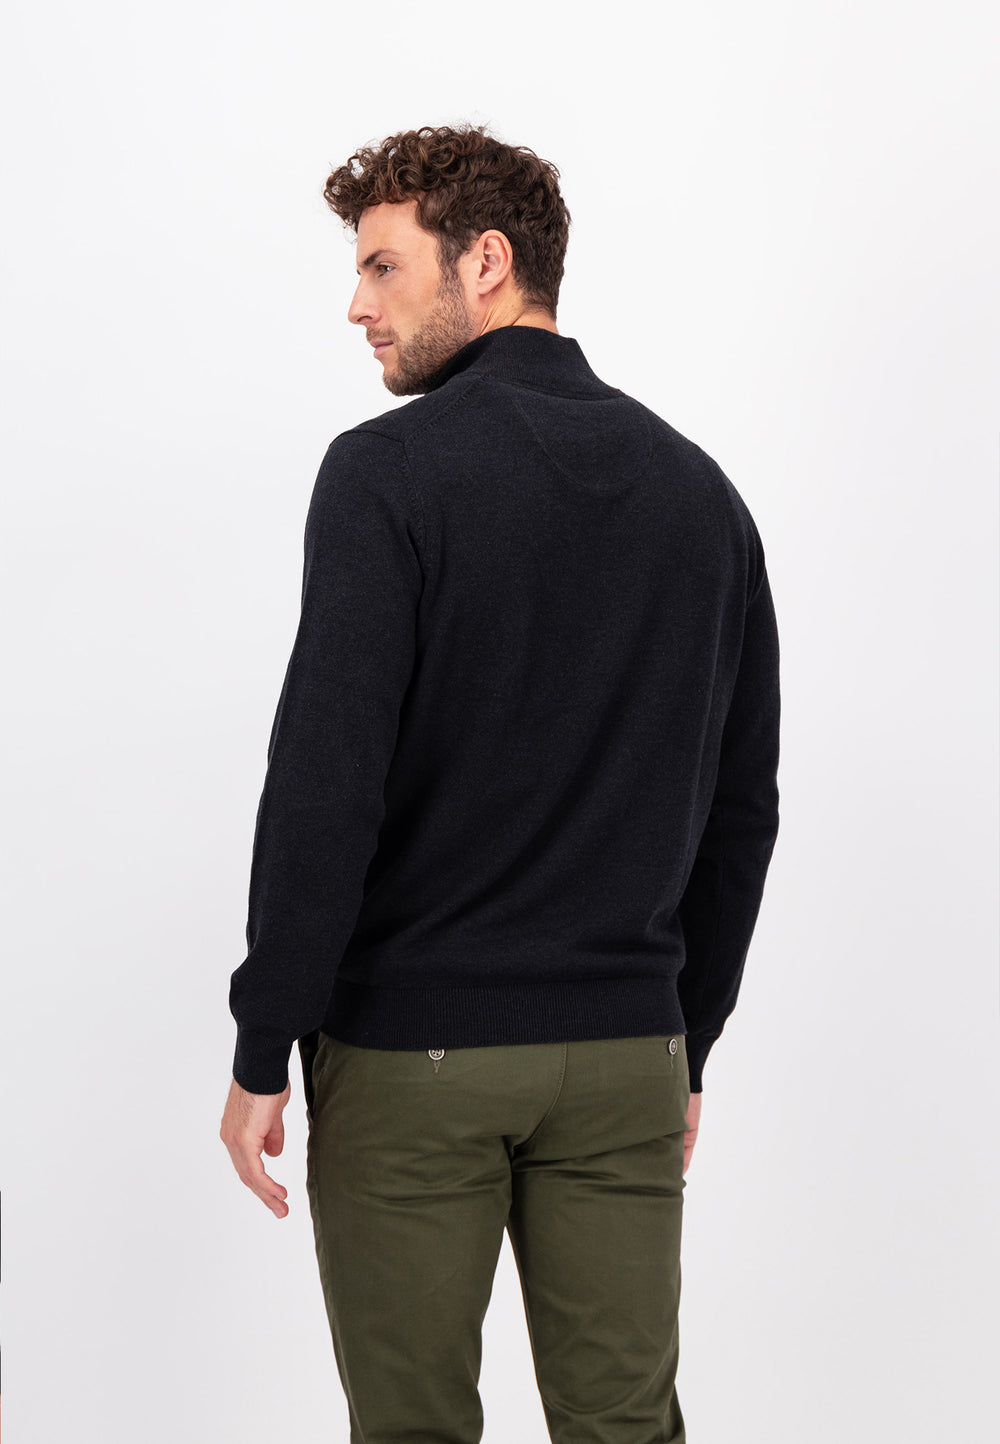 Men's sweater & knitted jackets – Tagged 